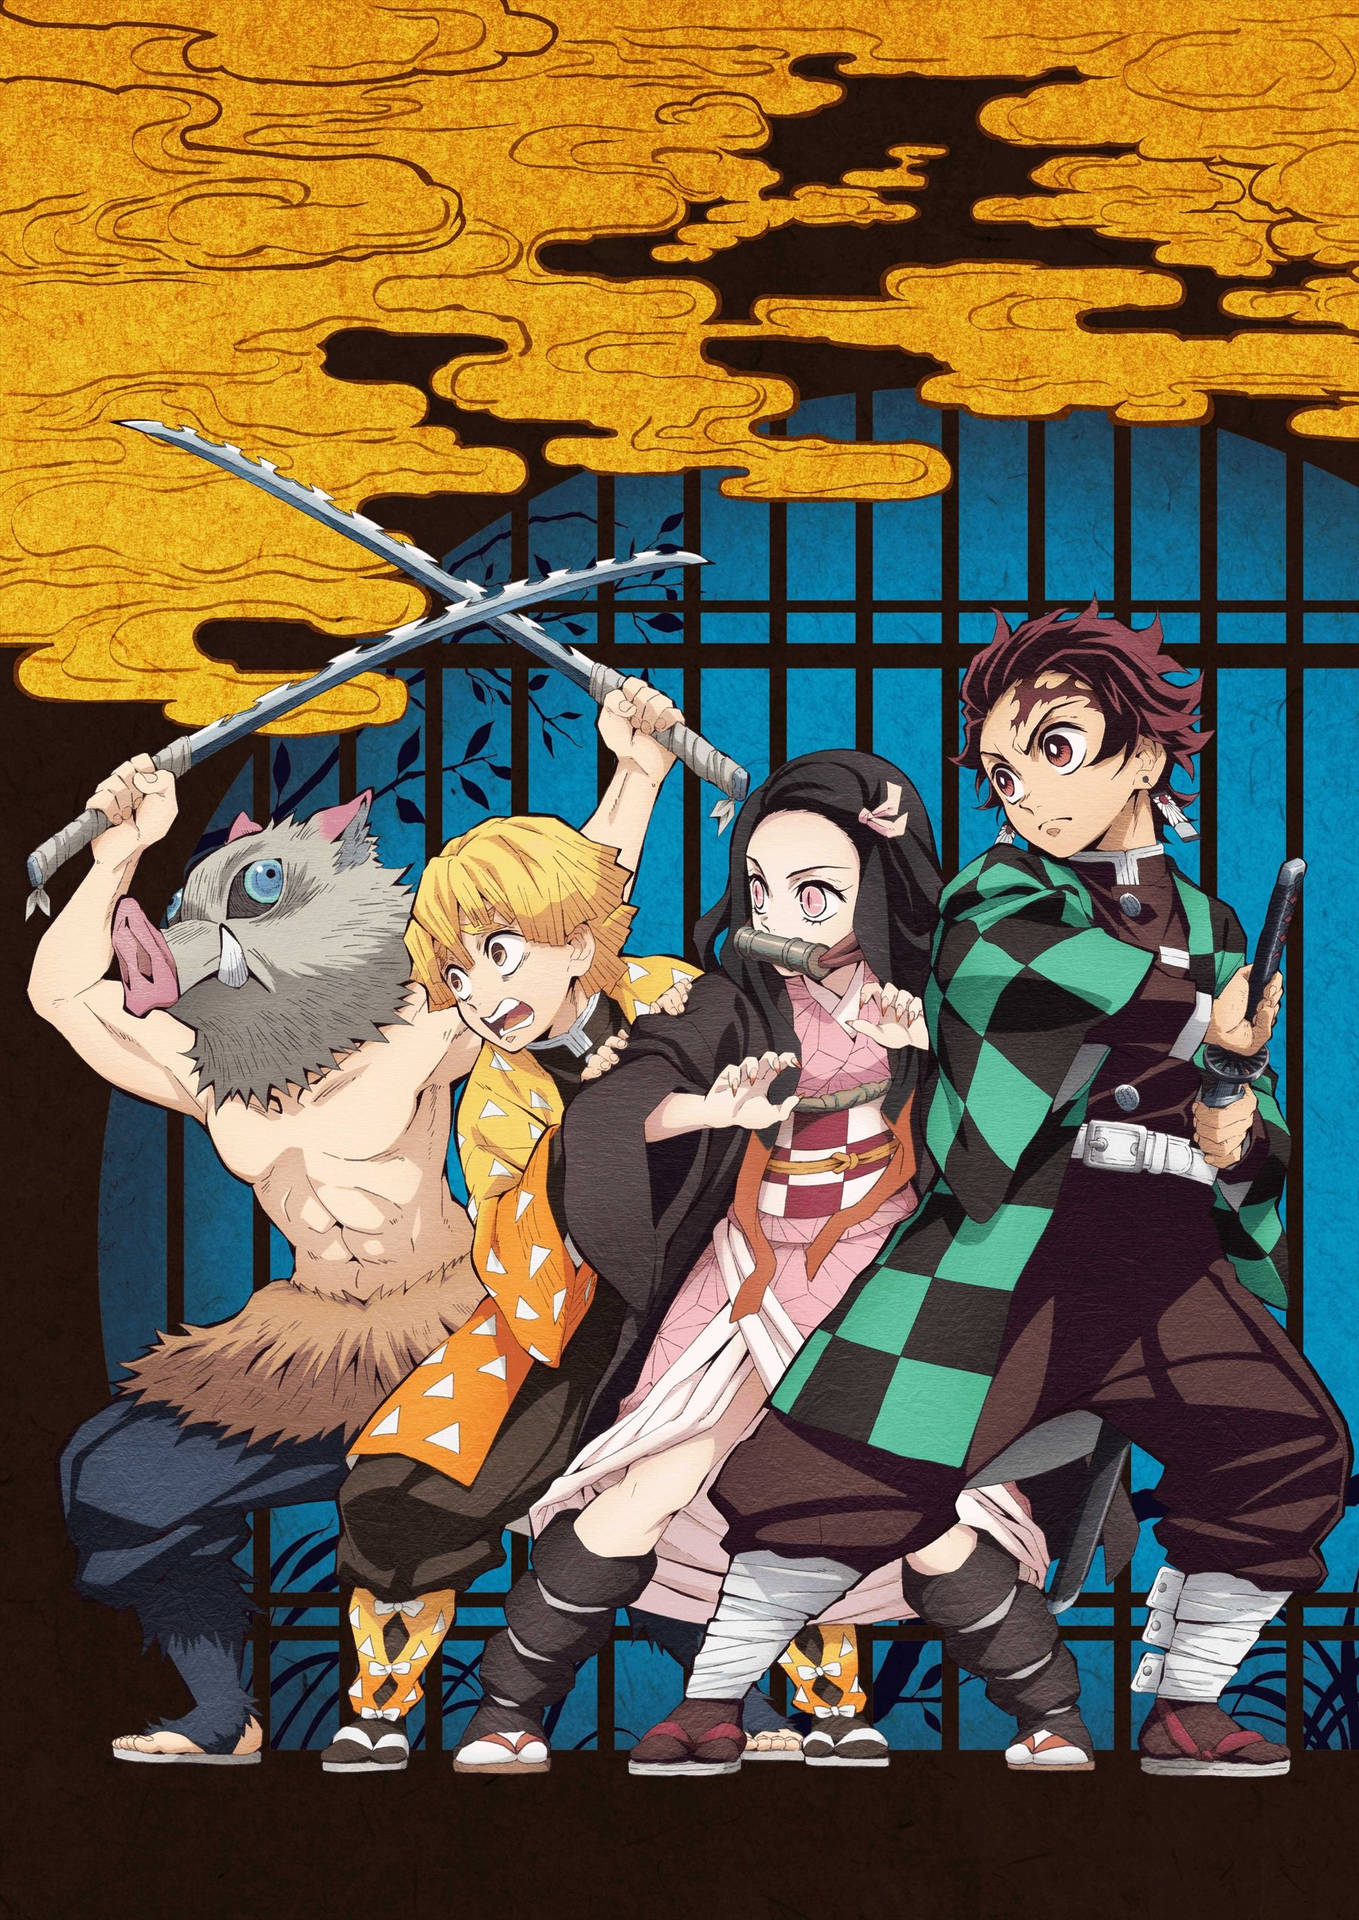 Tanjiro, Nezuko And The Demon Slayer Corps Launch An All-out Attack Against Evil. Background